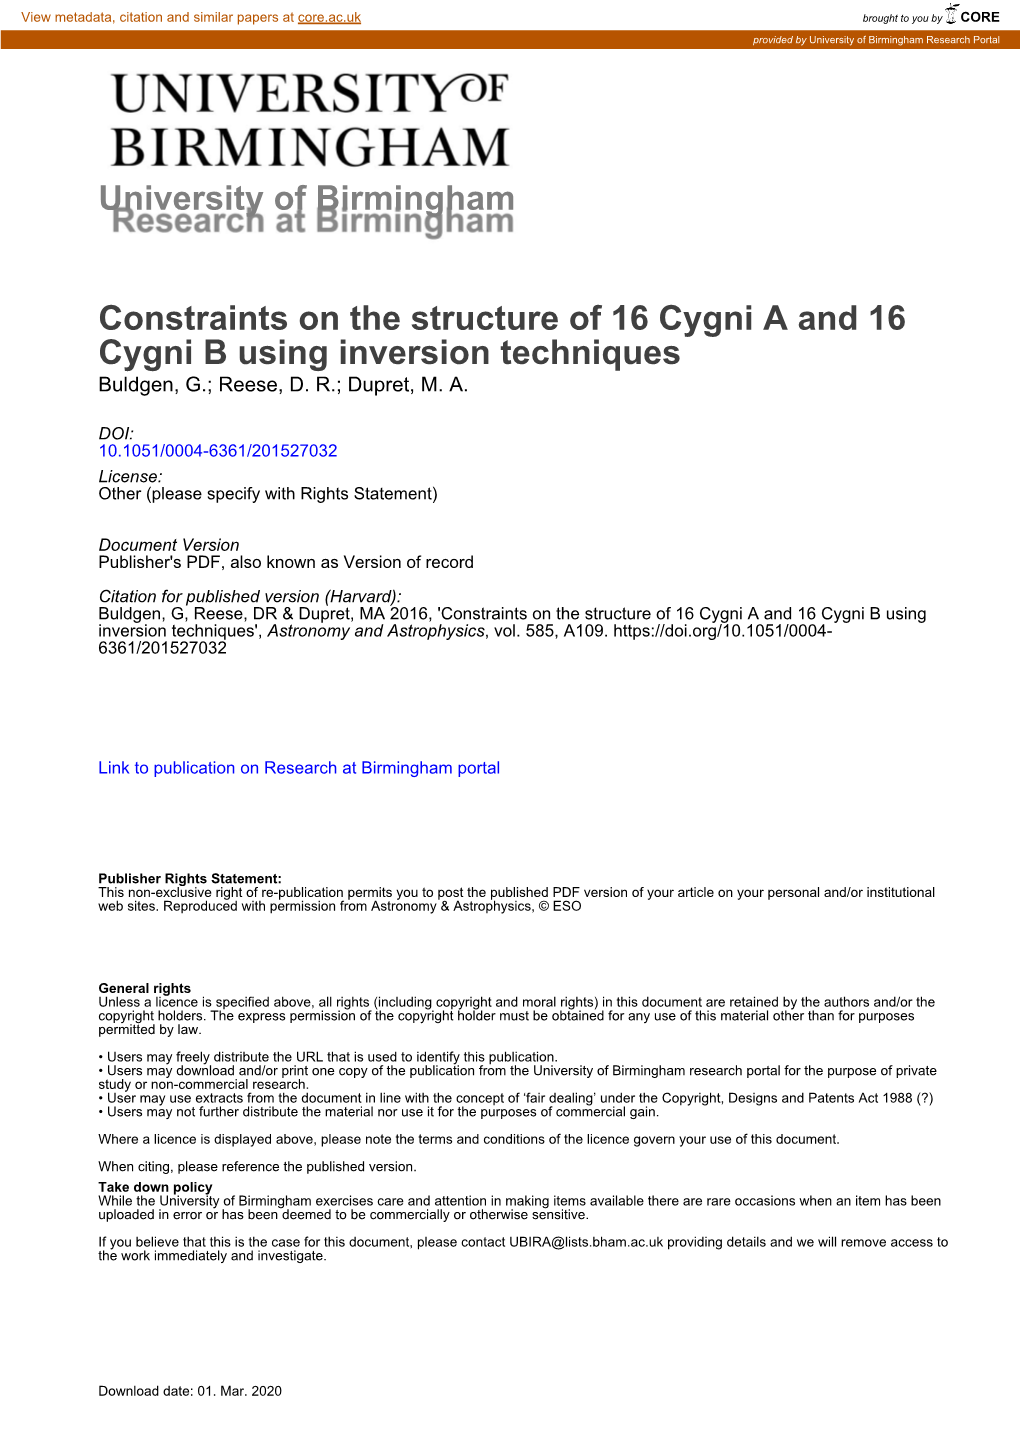 Constraints on the Structure of 16 Cygni a and 16 Cygni B Using Inversion Techniques Buldgen, G.; Reese, D